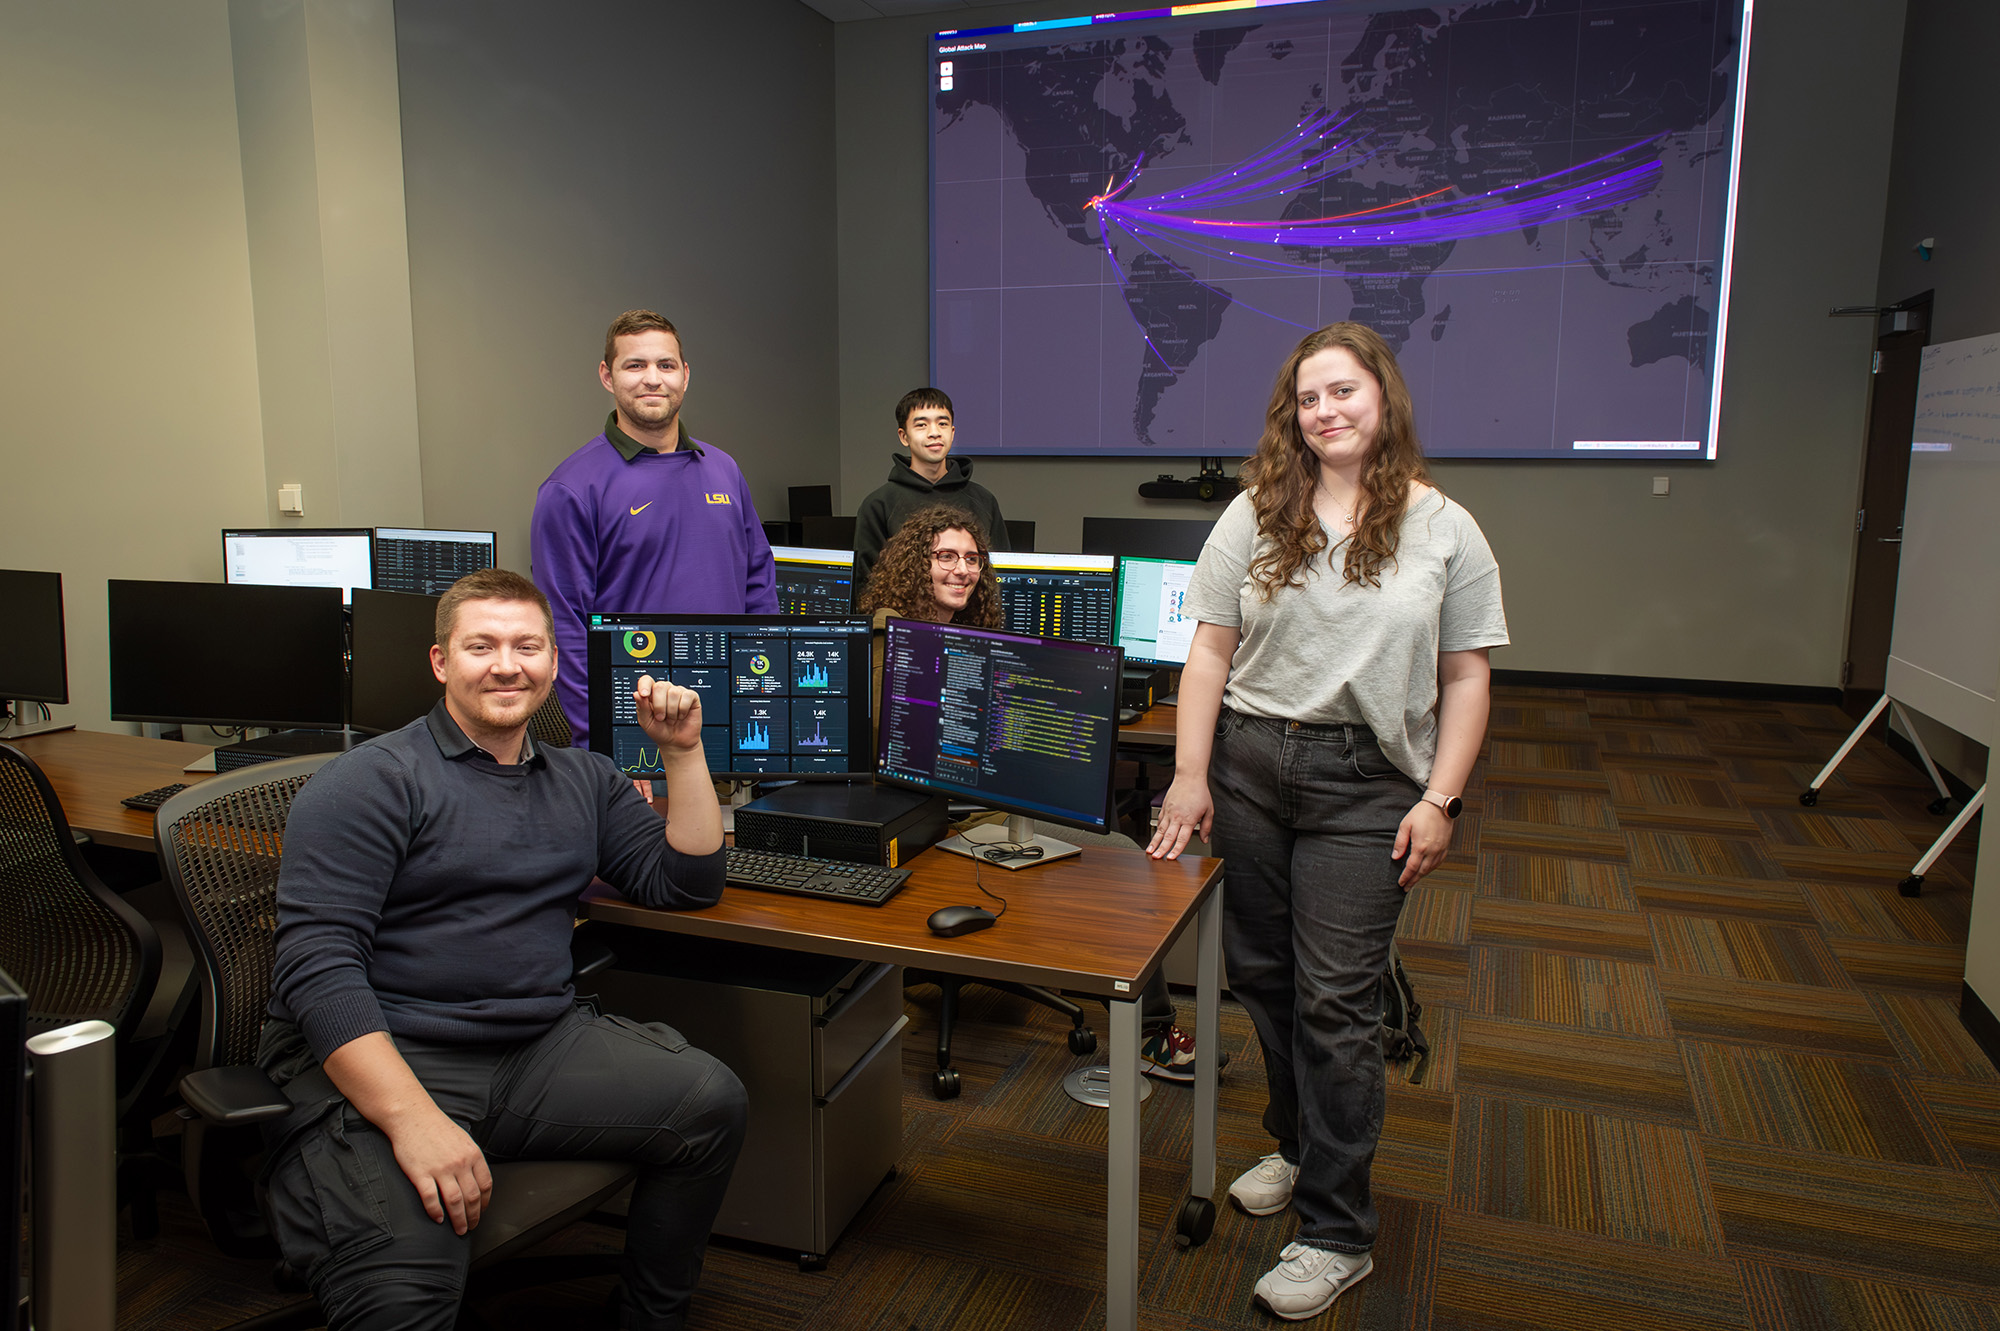 Students Easton Kling, Micah Champagne, Ellen Hoffman, Spencer Malone and Timmy Tran work in LSU’s Security Operations Center to protect Louisiana against cyber threats.